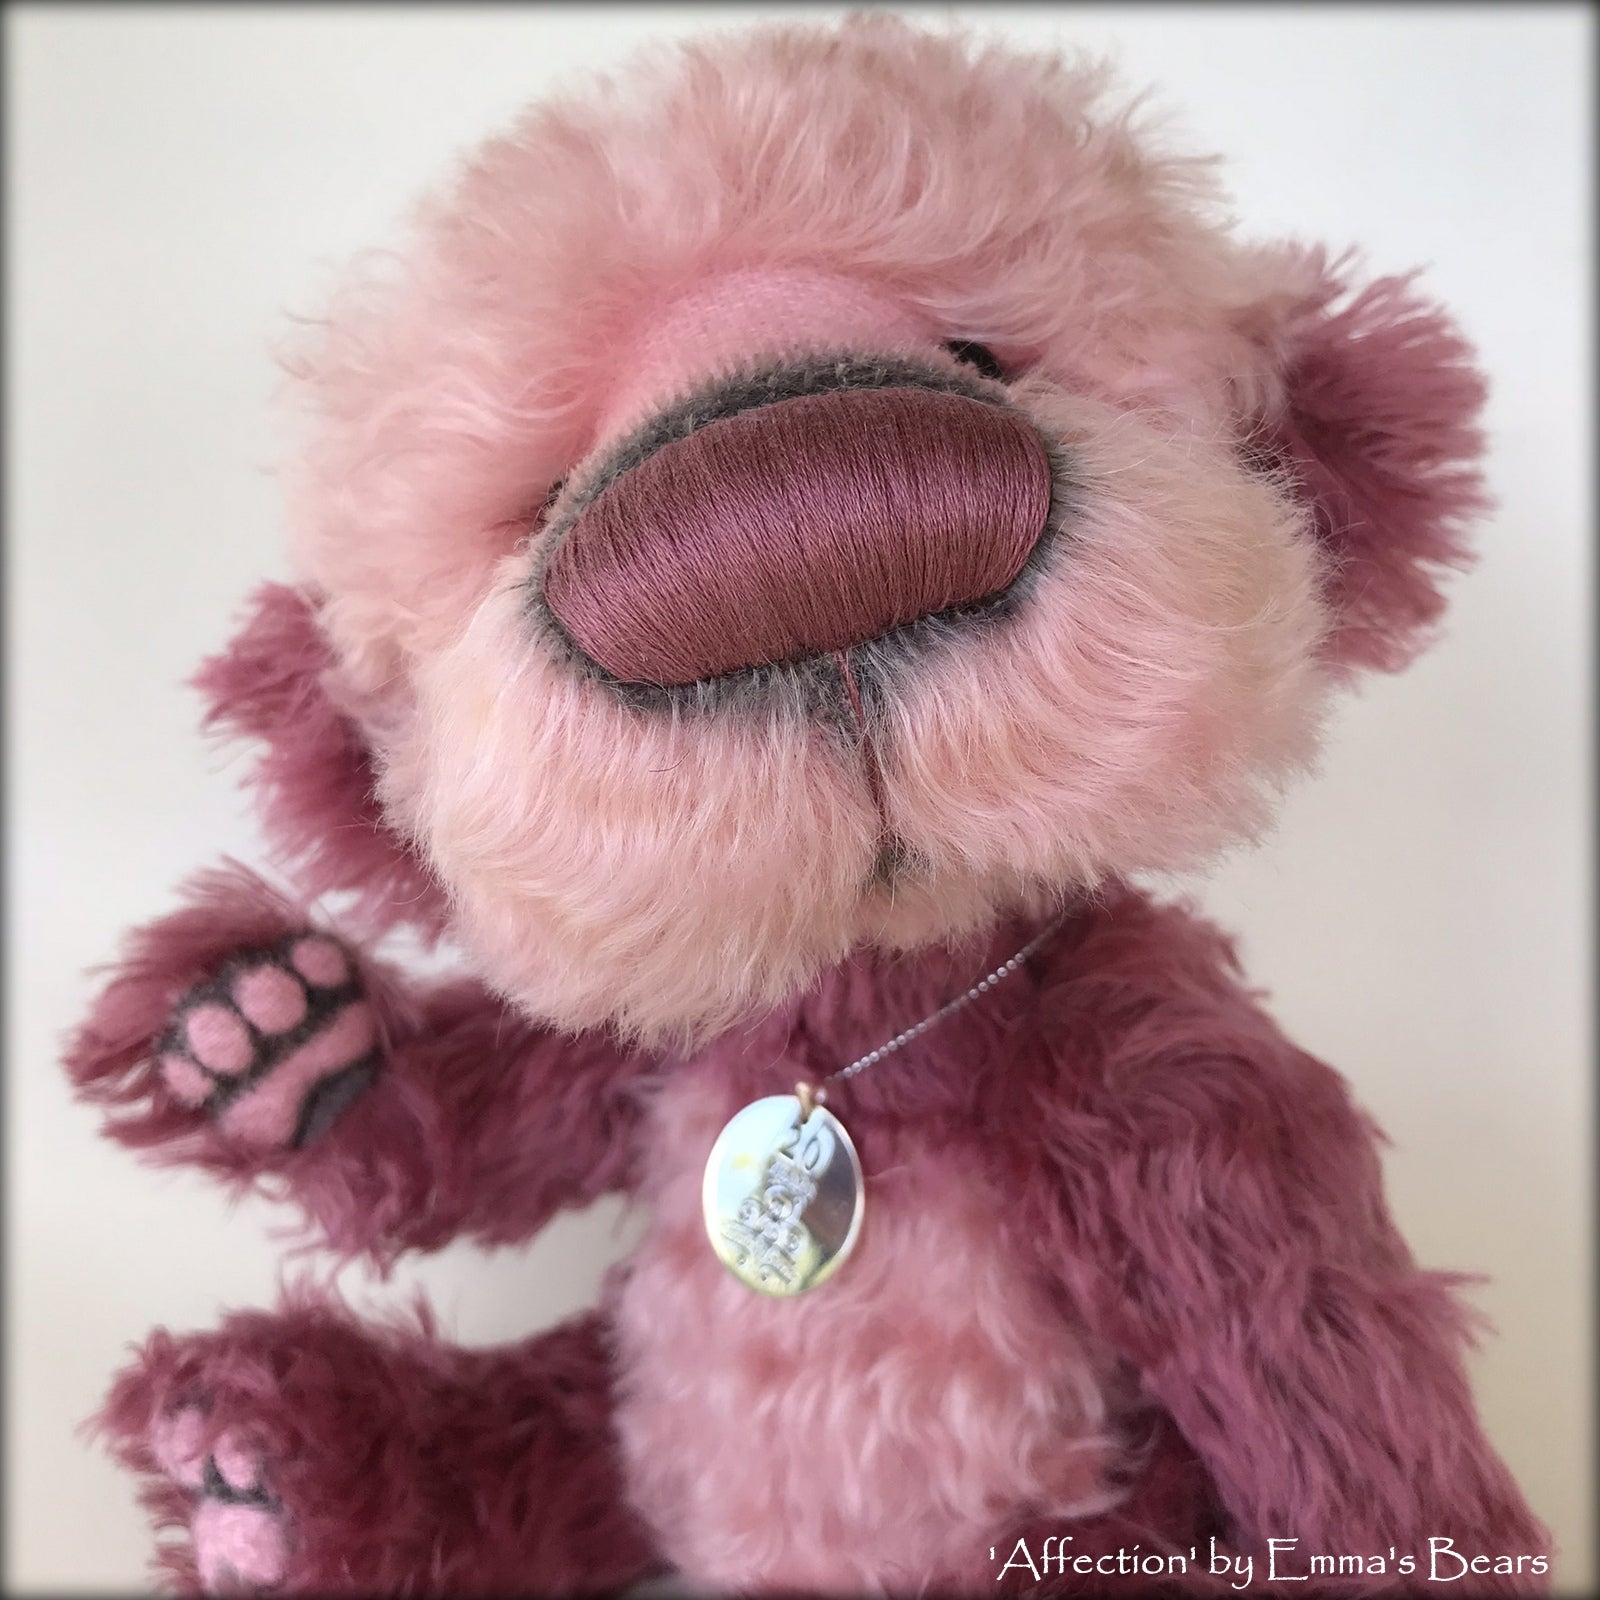 Affection - 20 Years of Emma's Bears Commemorative Teddy - OOAK in a series